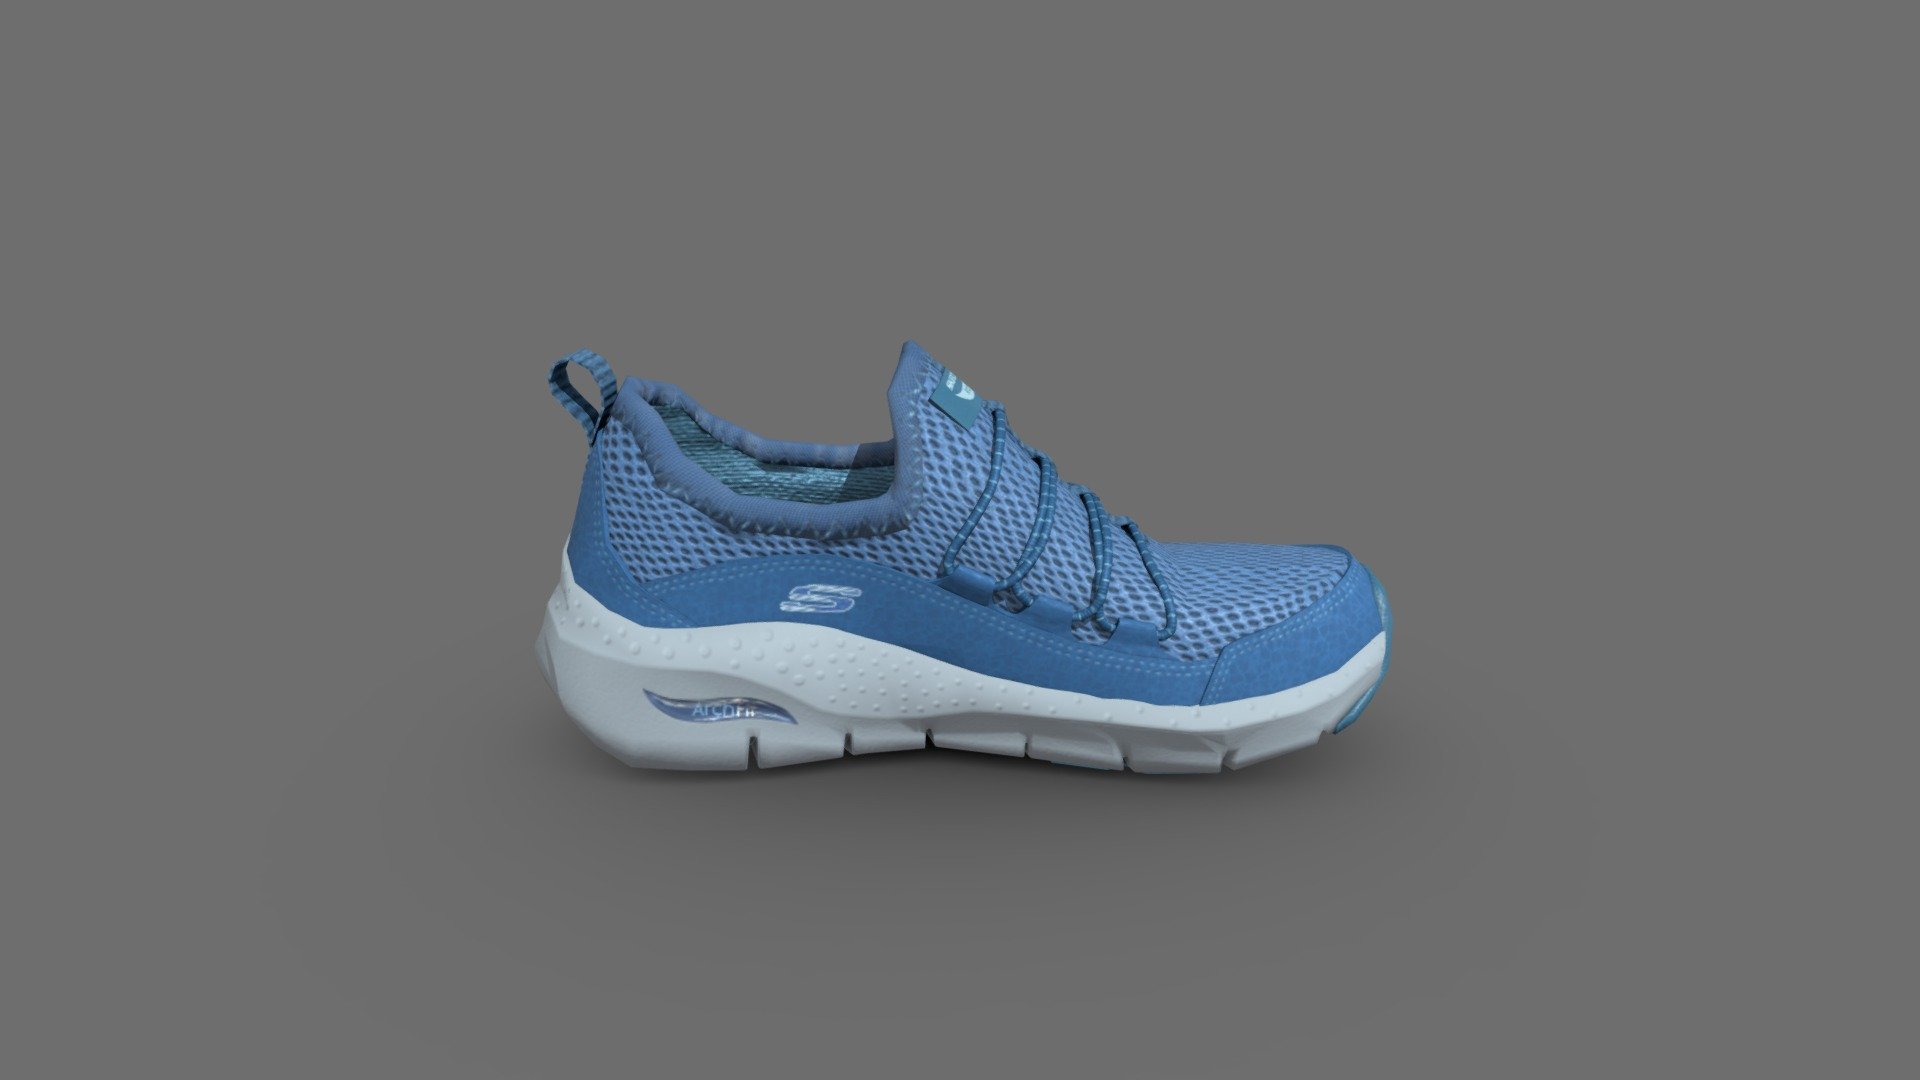 Shoe modeled for VR. Created in Max, textured in Substance painter 3d model